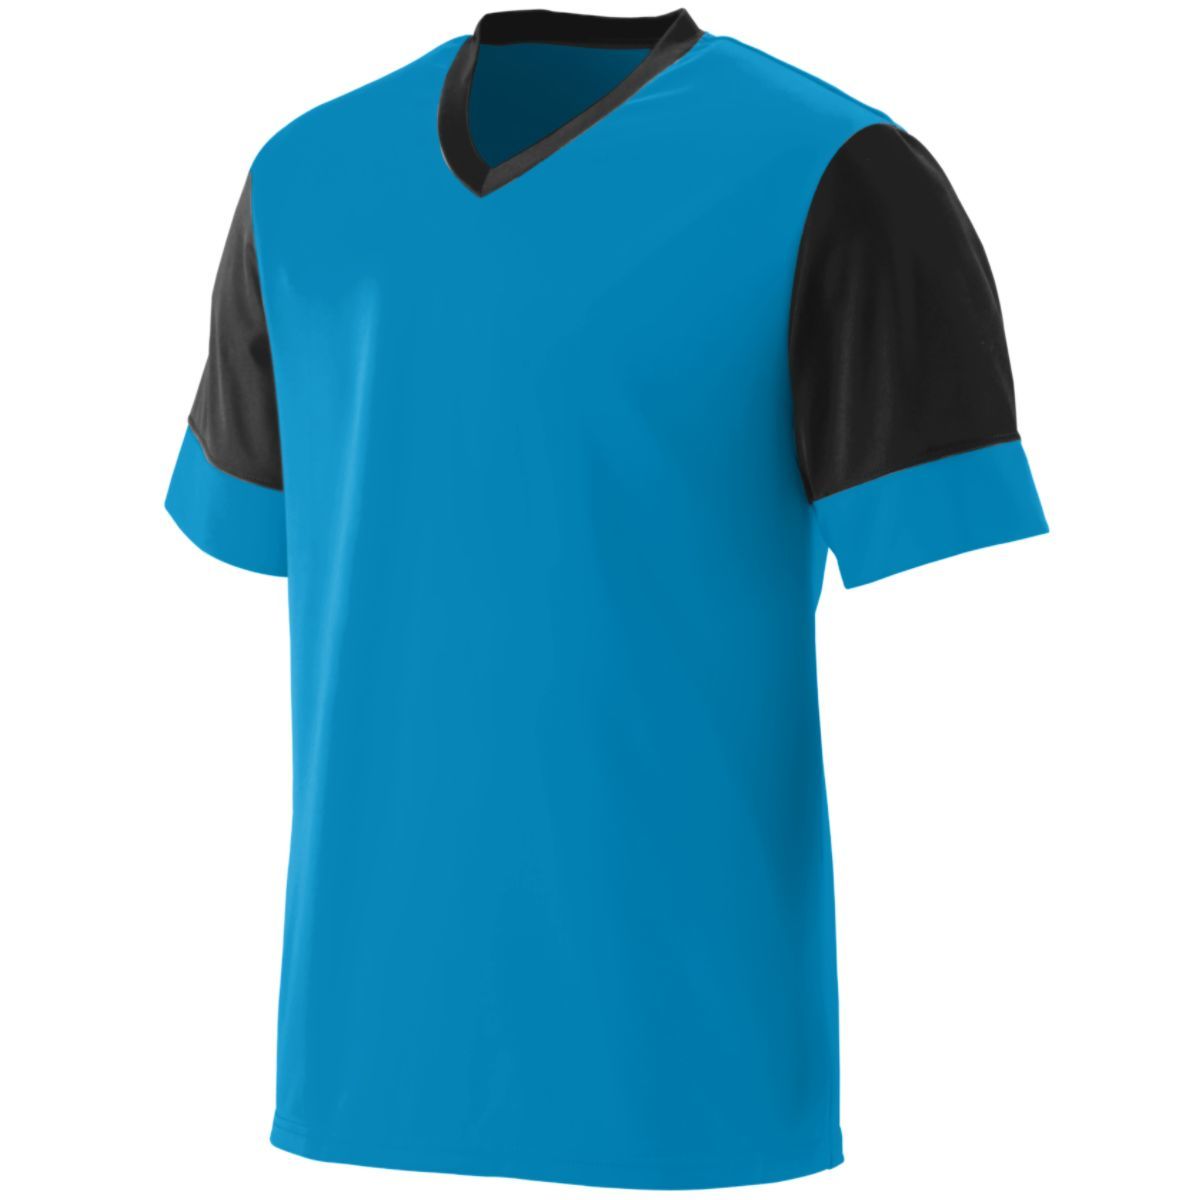 Augusta Sportswear Youth Lightning Jersey in Power Blue/Black  -Part of the Youth, Youth-Jersey, Augusta-Products, Soccer, Shirts, All-Sports-1 product lines at KanaleyCreations.com